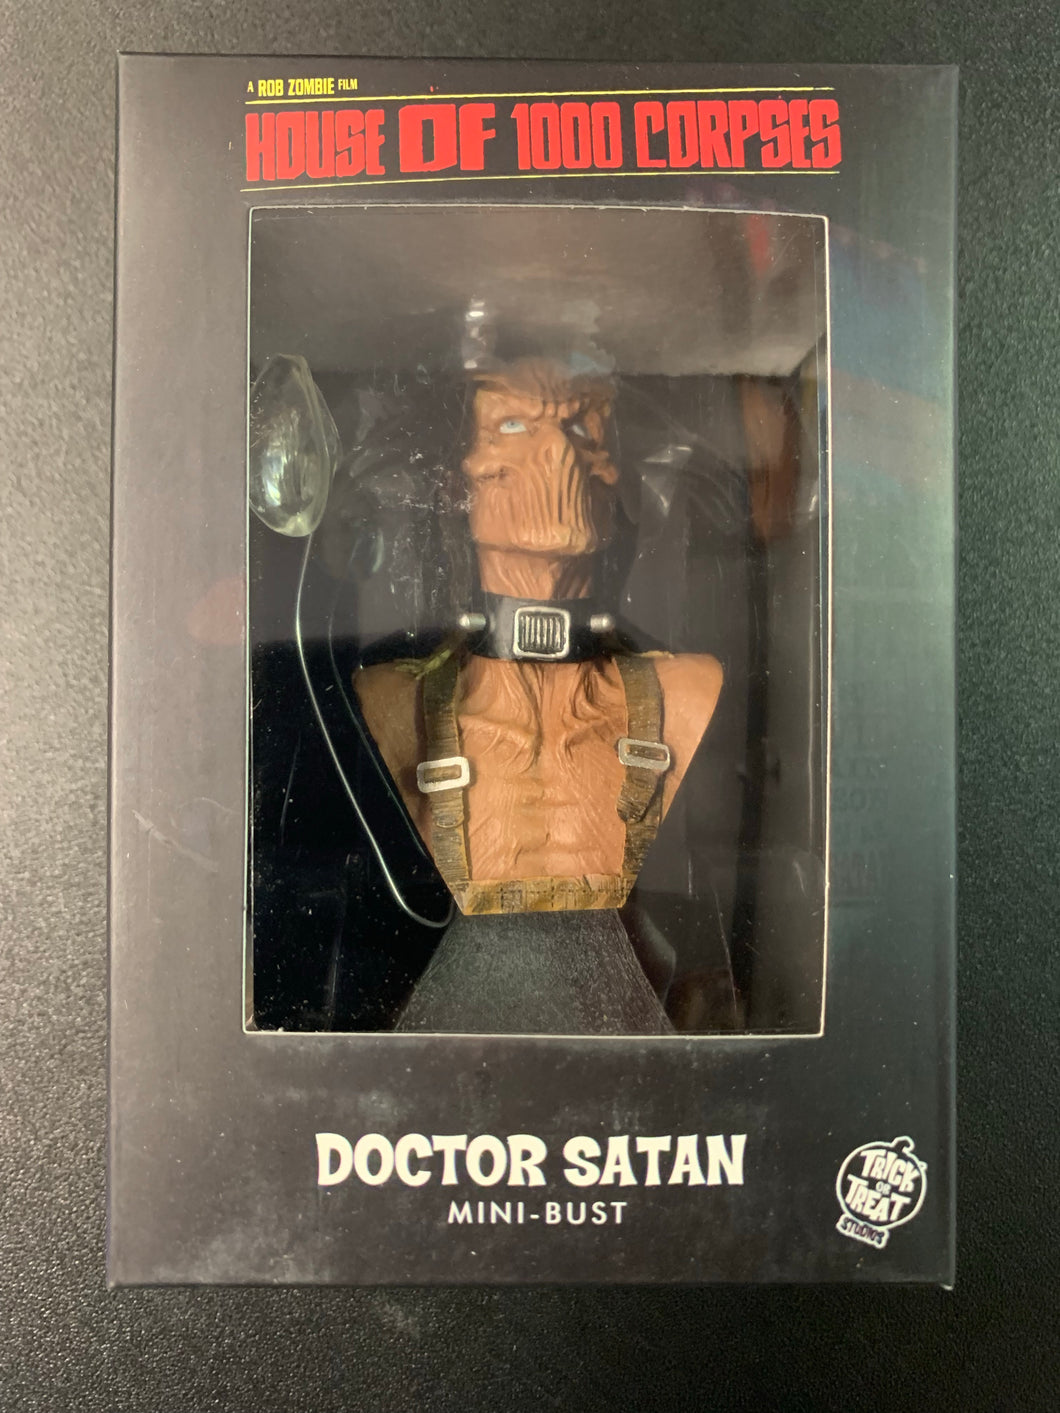 HOUSE OF 1,000 CORPSES - DR. SATAN MINI BUST